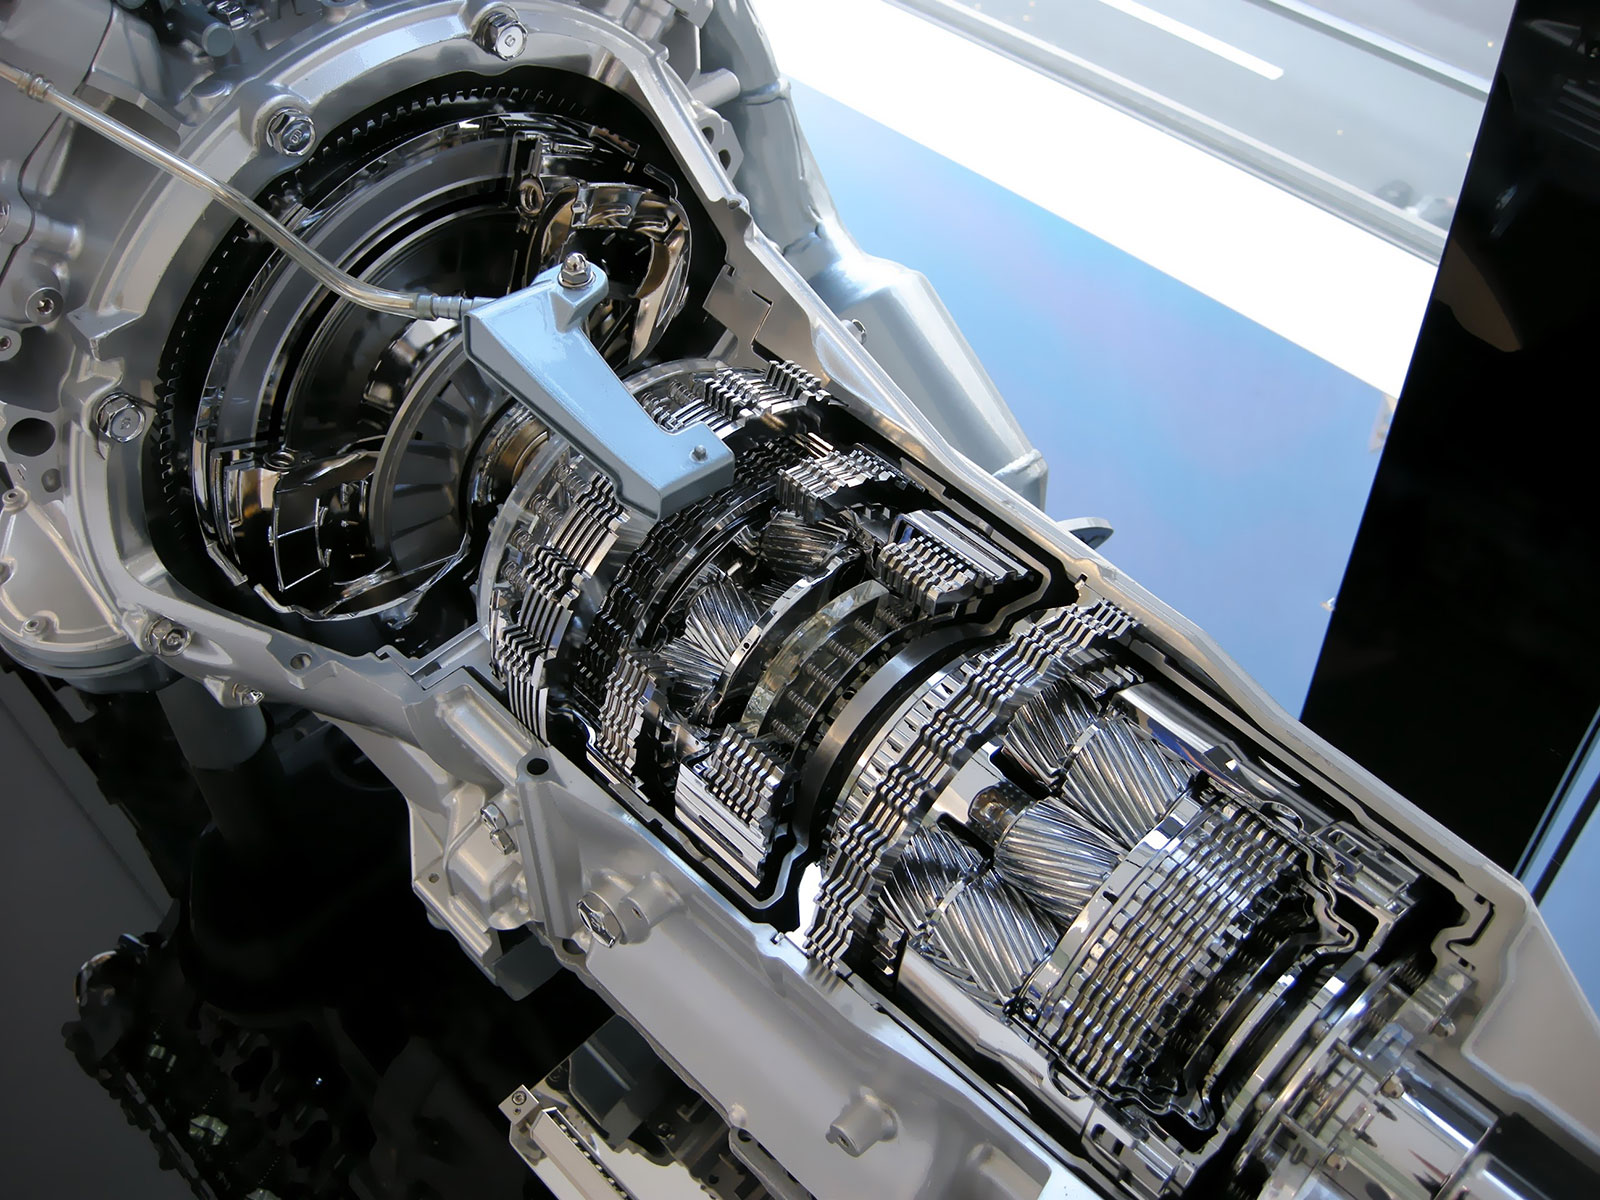 An automatic transmission